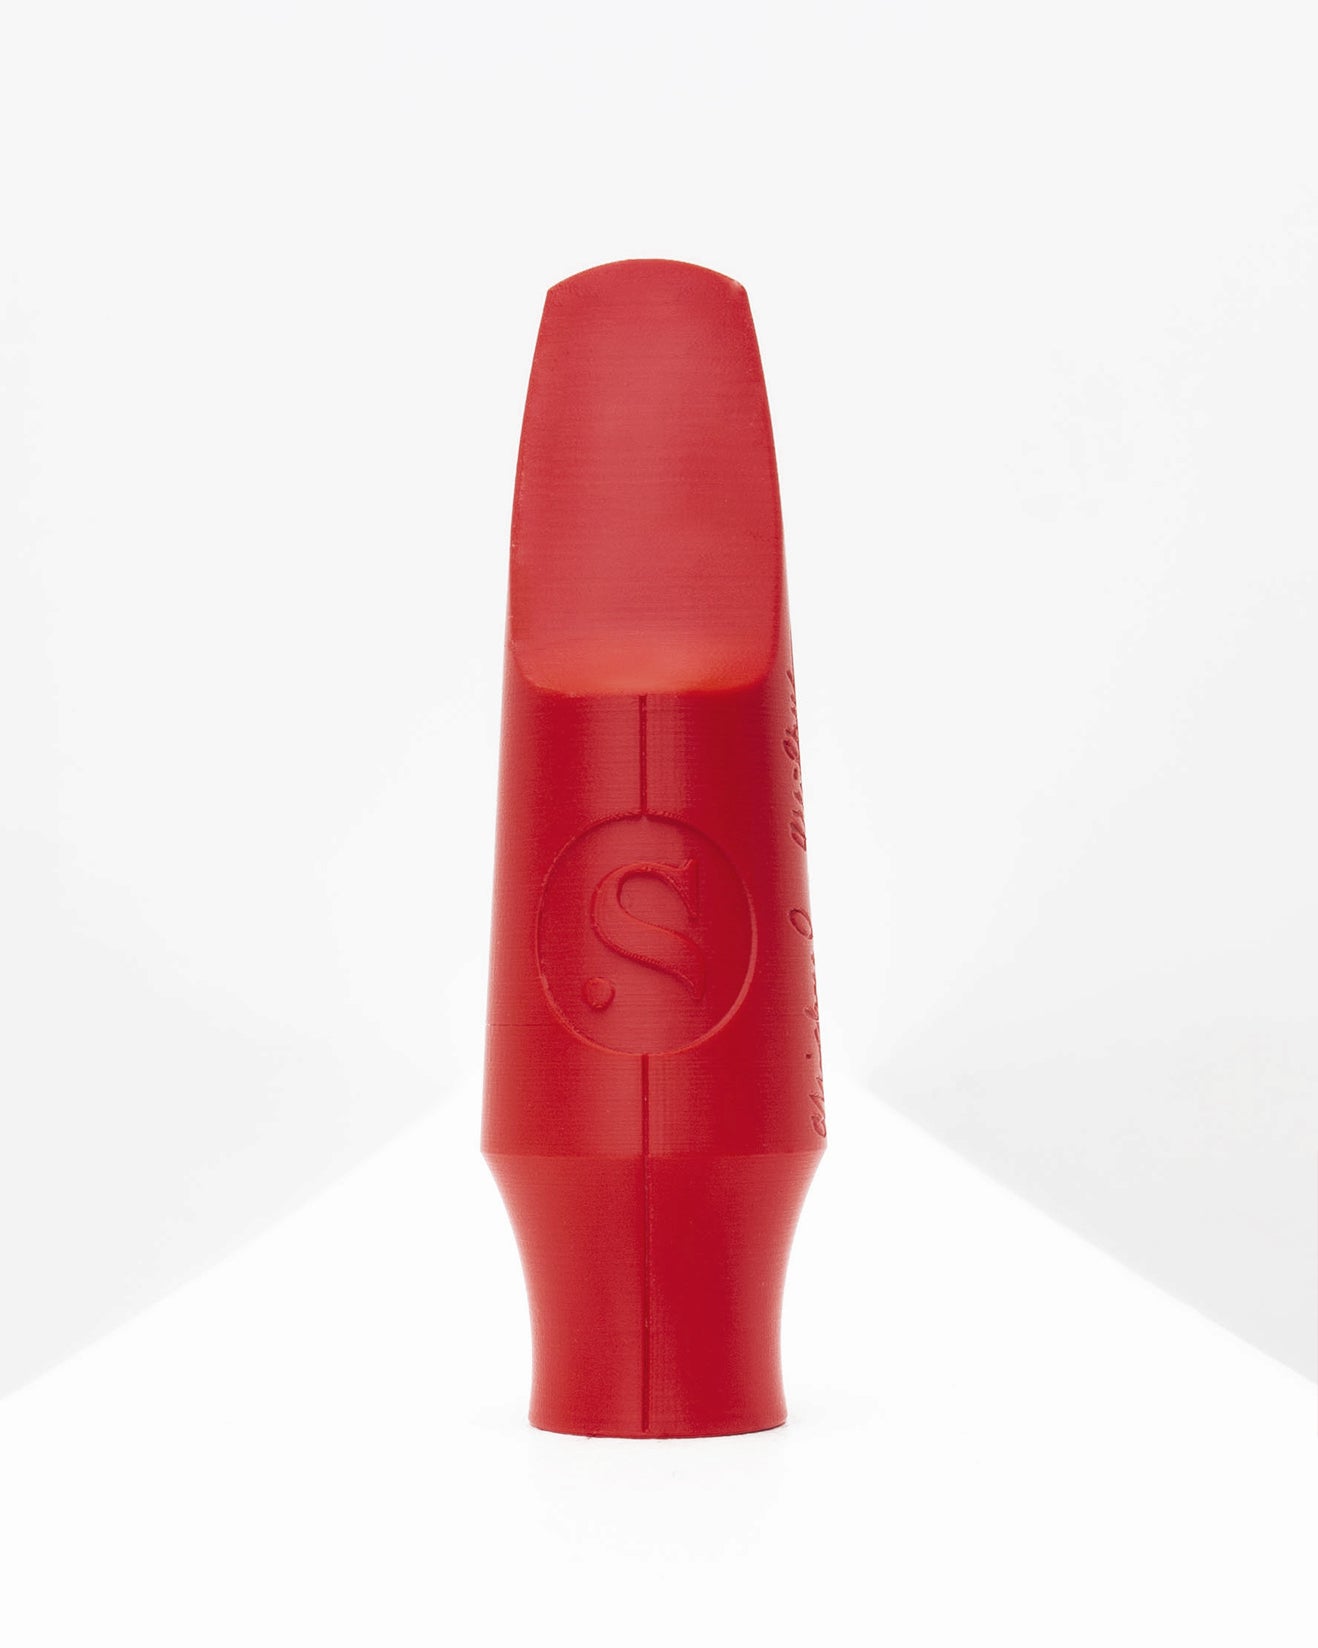 Tenor Signature Saxophone mouthpiece - Eddie Rich by Syos - 9 / Carmine Red